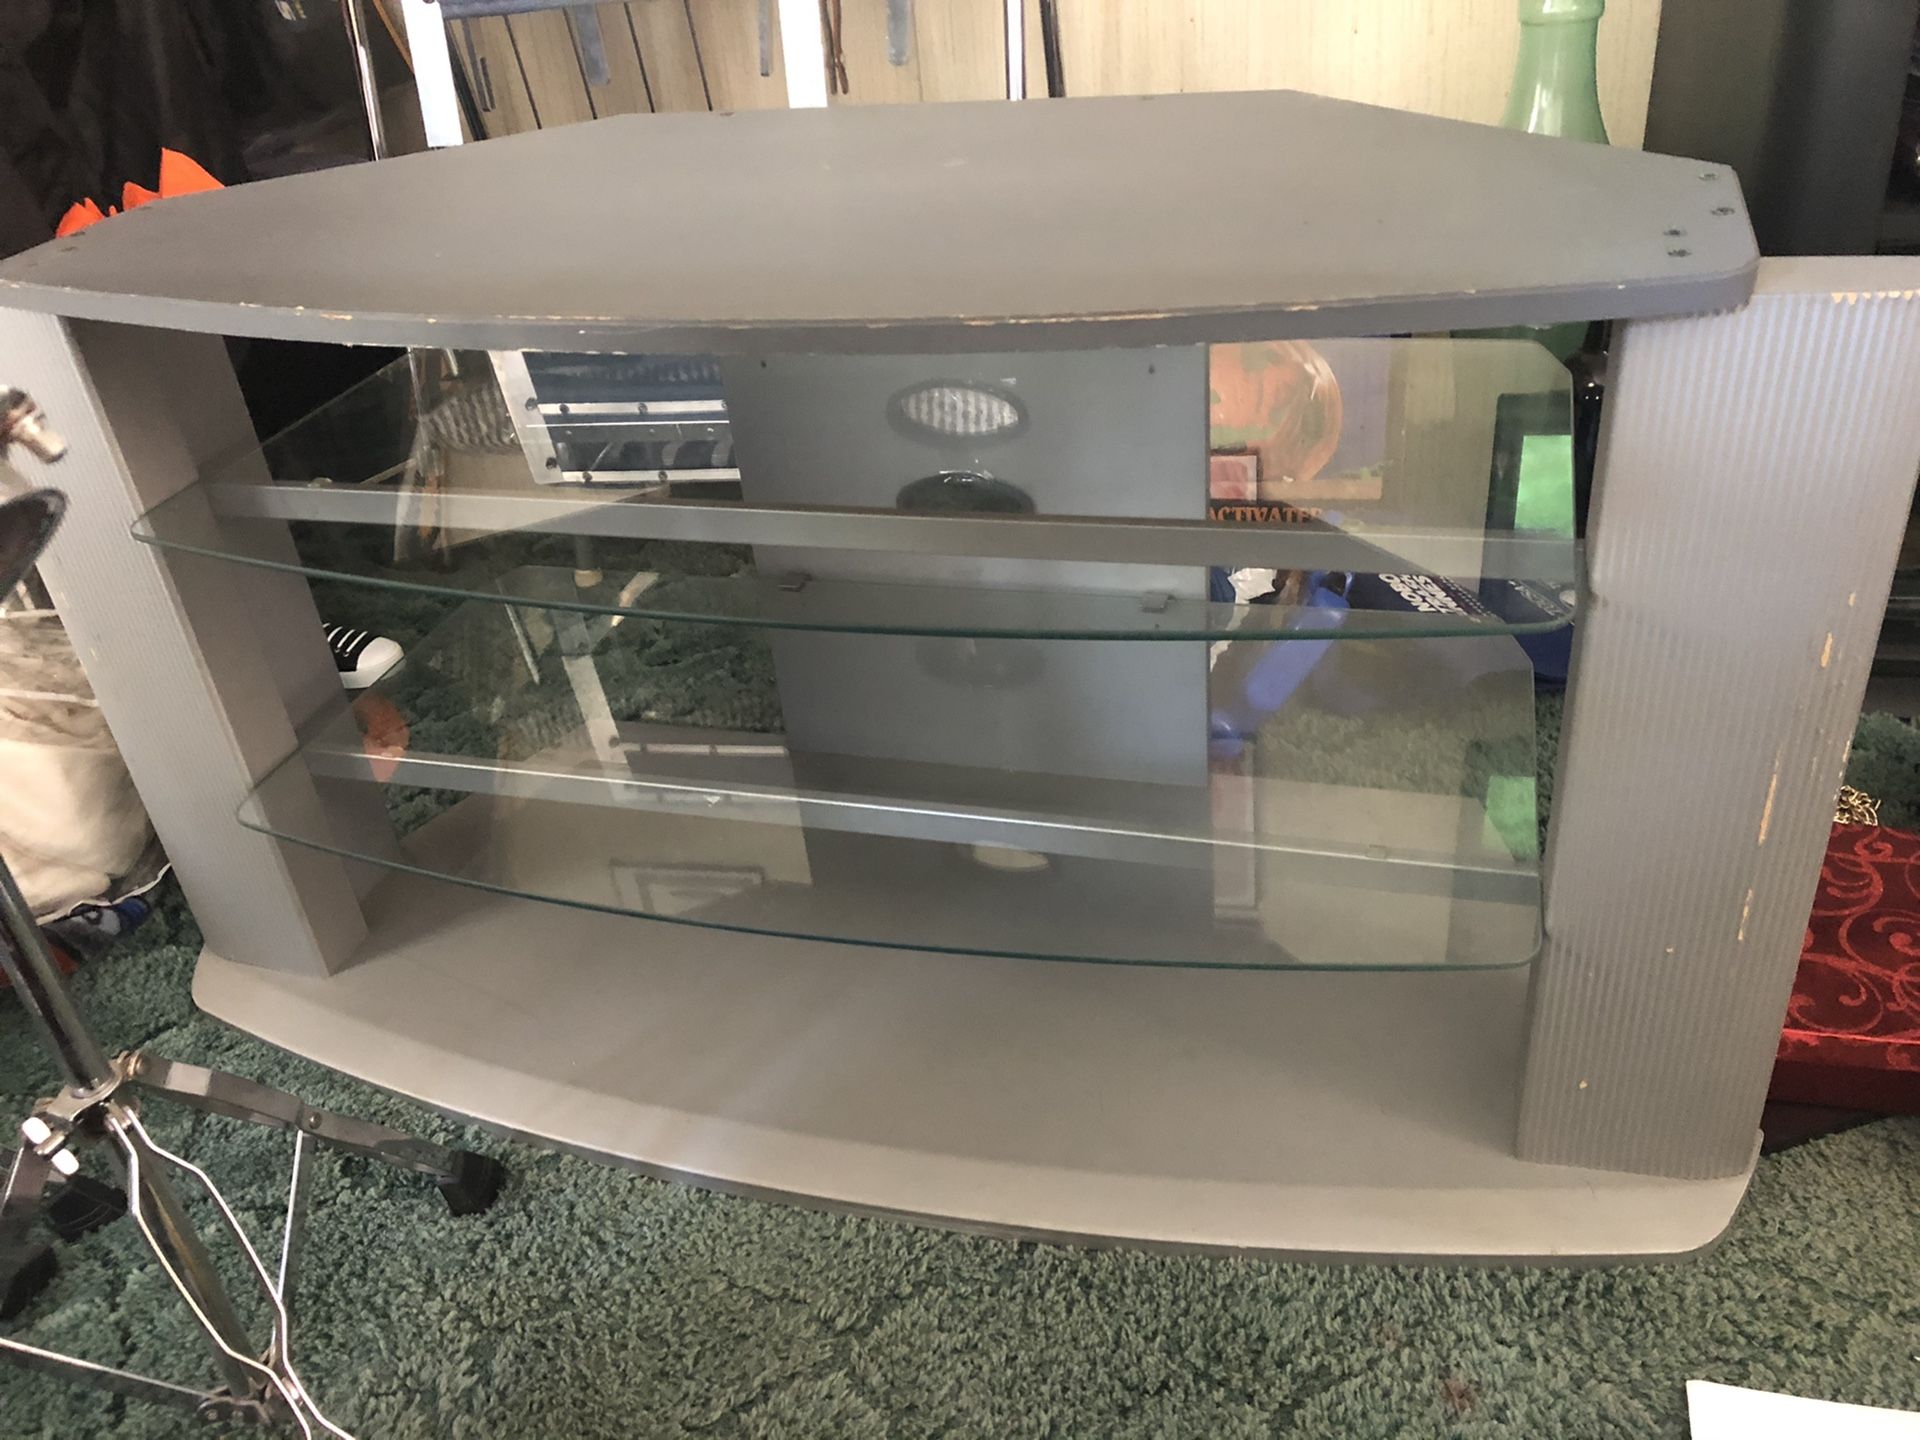 Wonderful condition tv stand